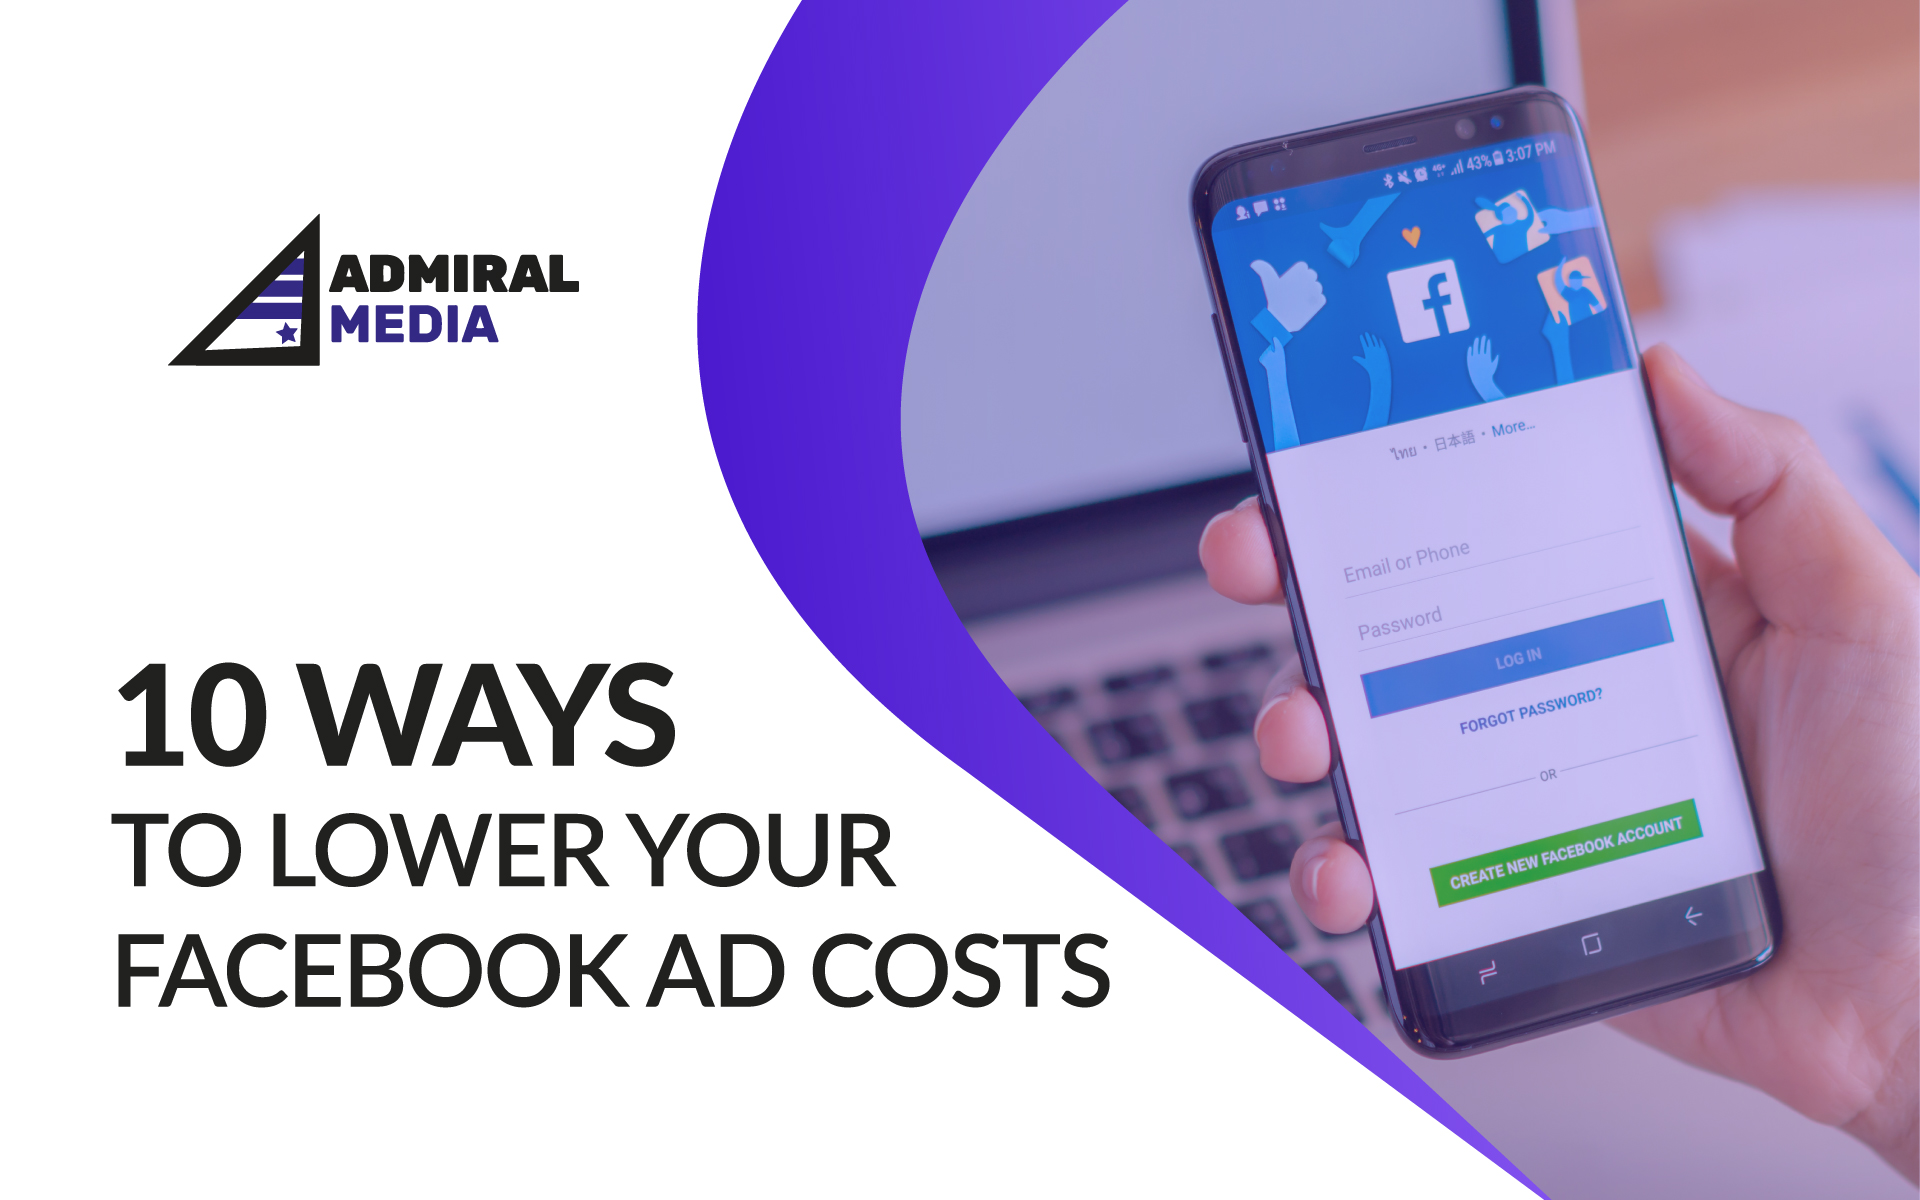 10 ways to lower your Facebook as costs